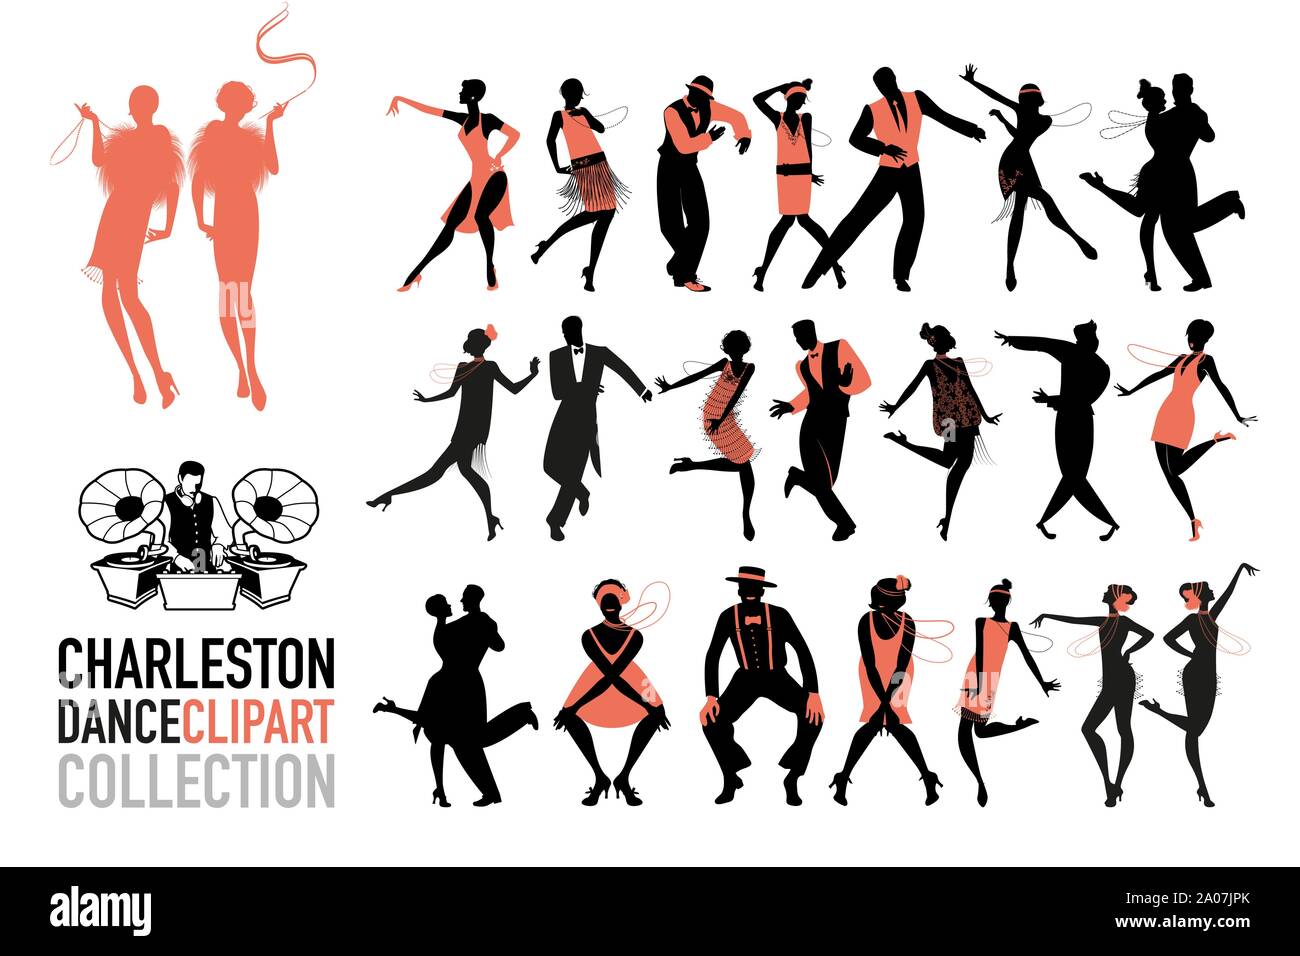 Charleston dance clipart collection. Set of jazz dancers isolated on white background. Stock Vector